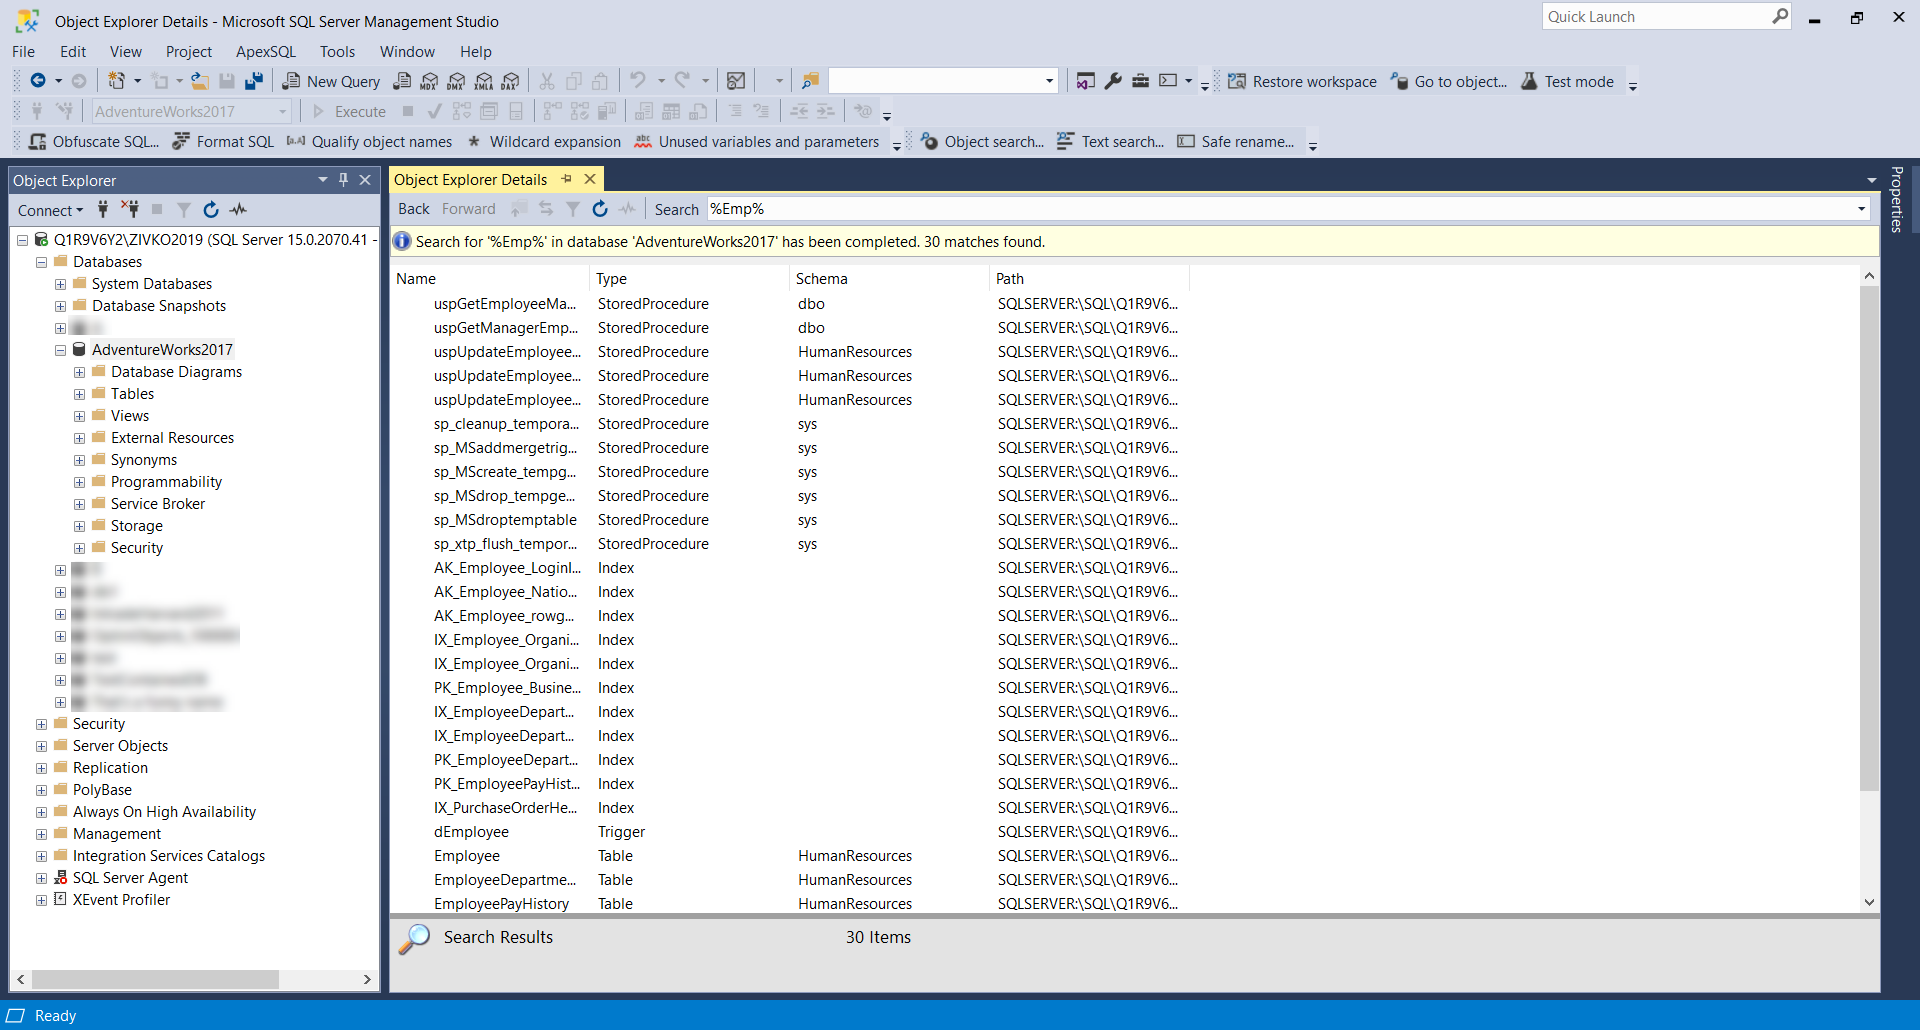 Find SQL objects using Object Explorer Details window